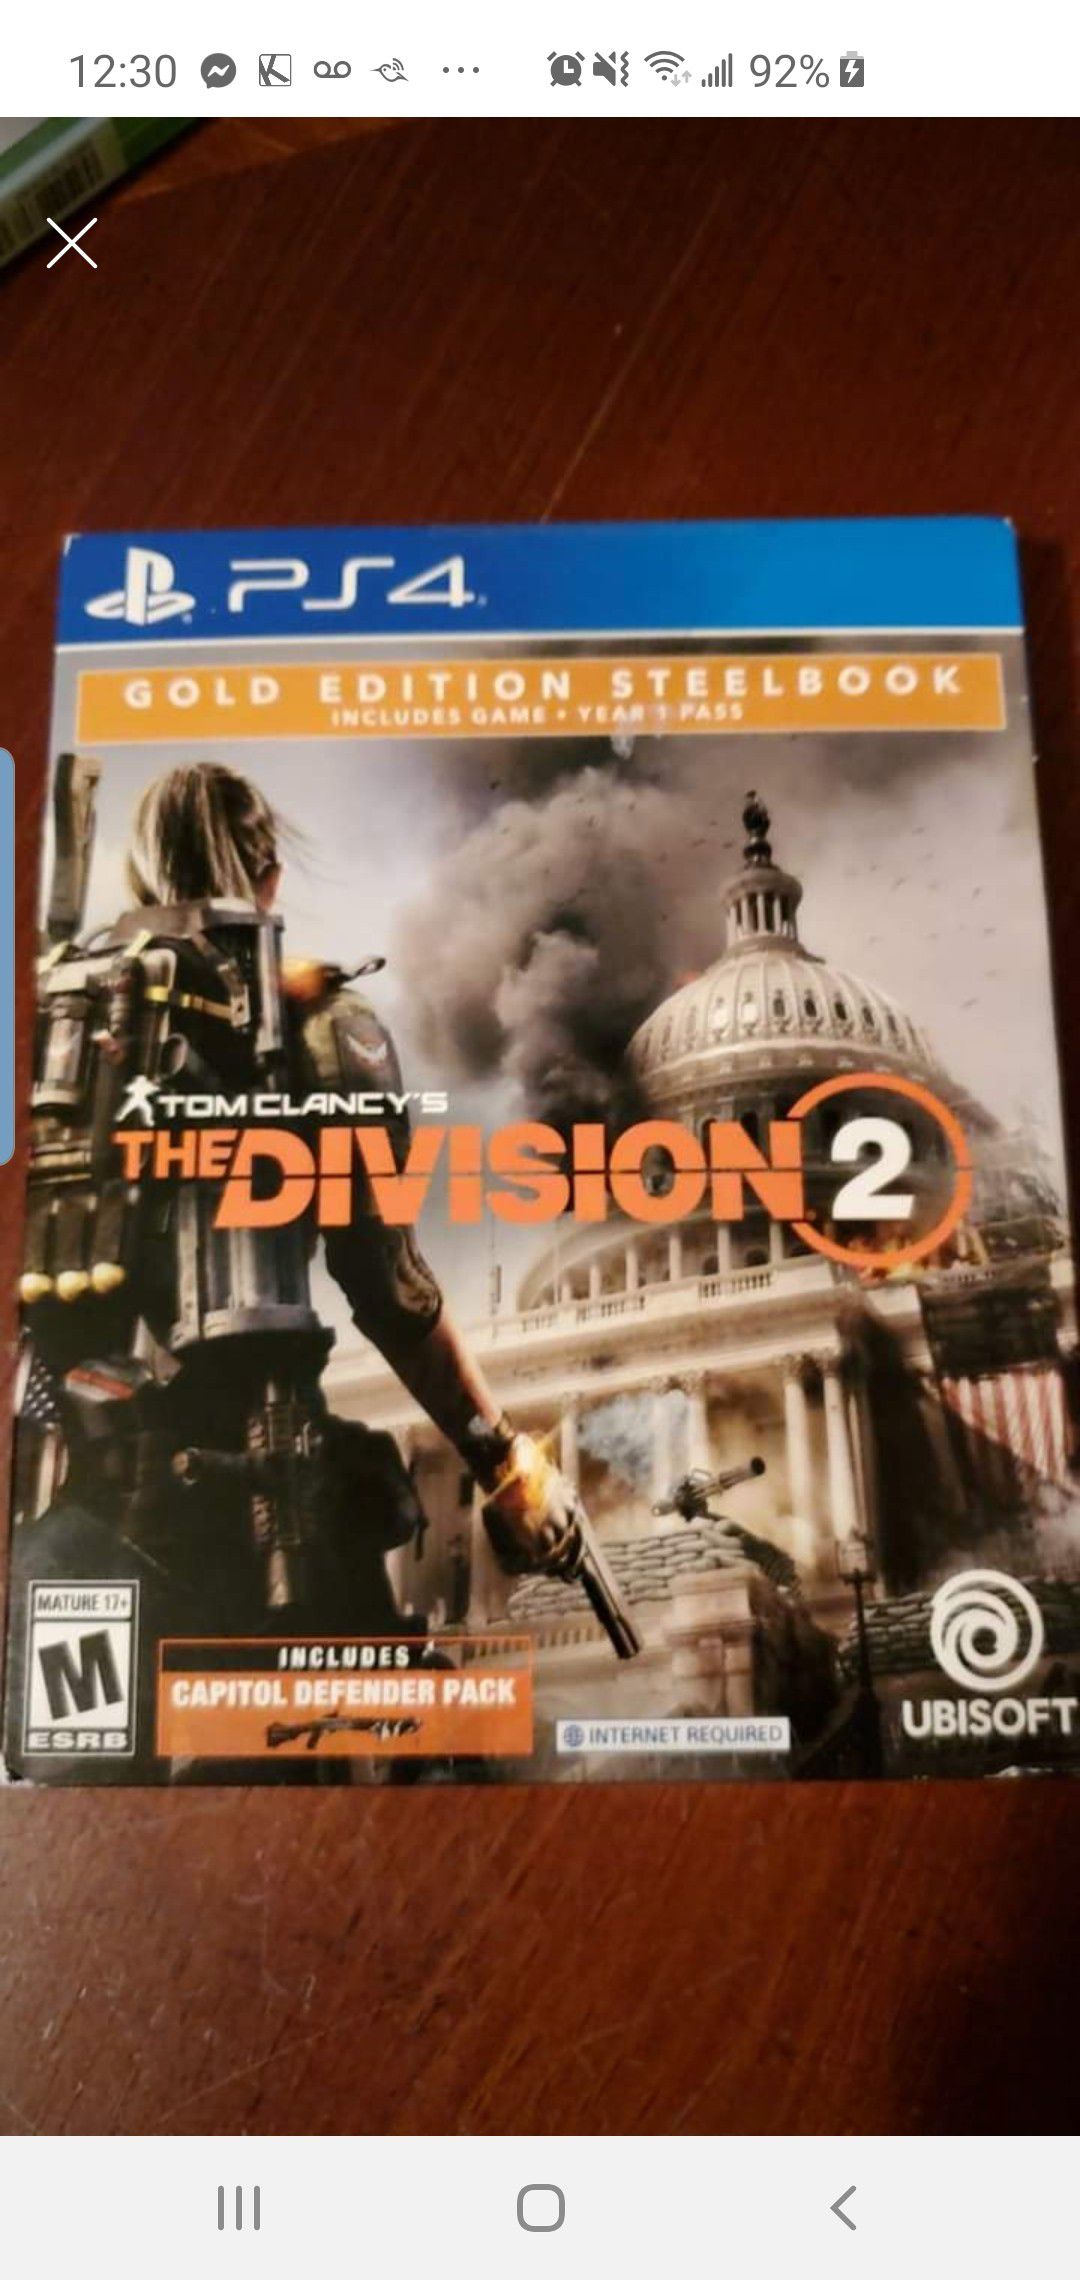 New Ps4 Gold Edition Steelbook Tom Clancy's